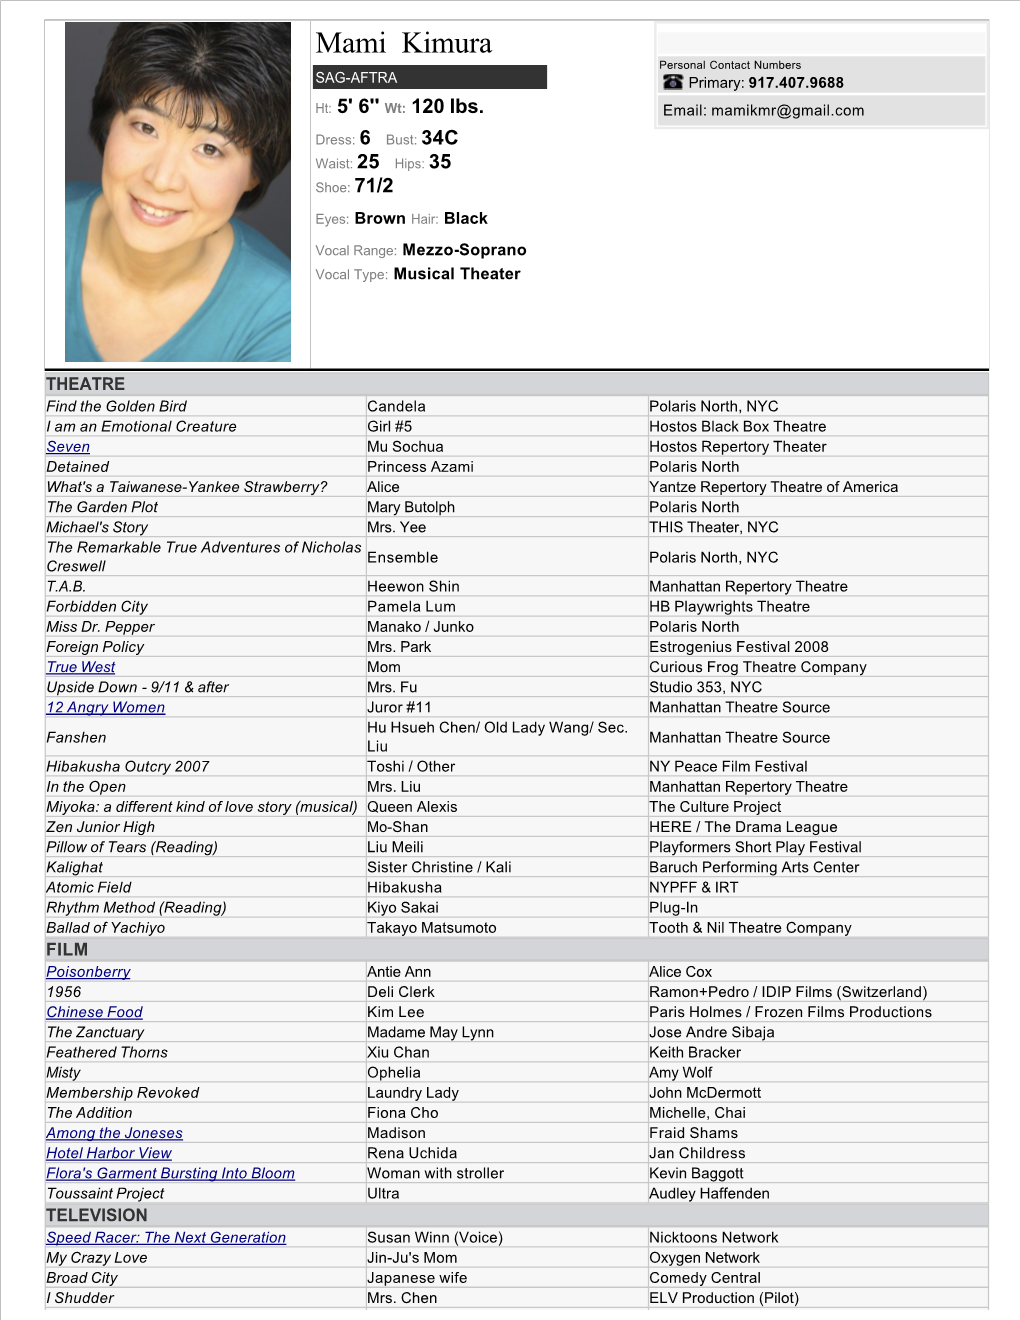 Mami Kimura Personal Contact Numbers SAG-AFTRA Primary: 917.407.9688 Ht: 5' 6'' Wt: 120 Lbs